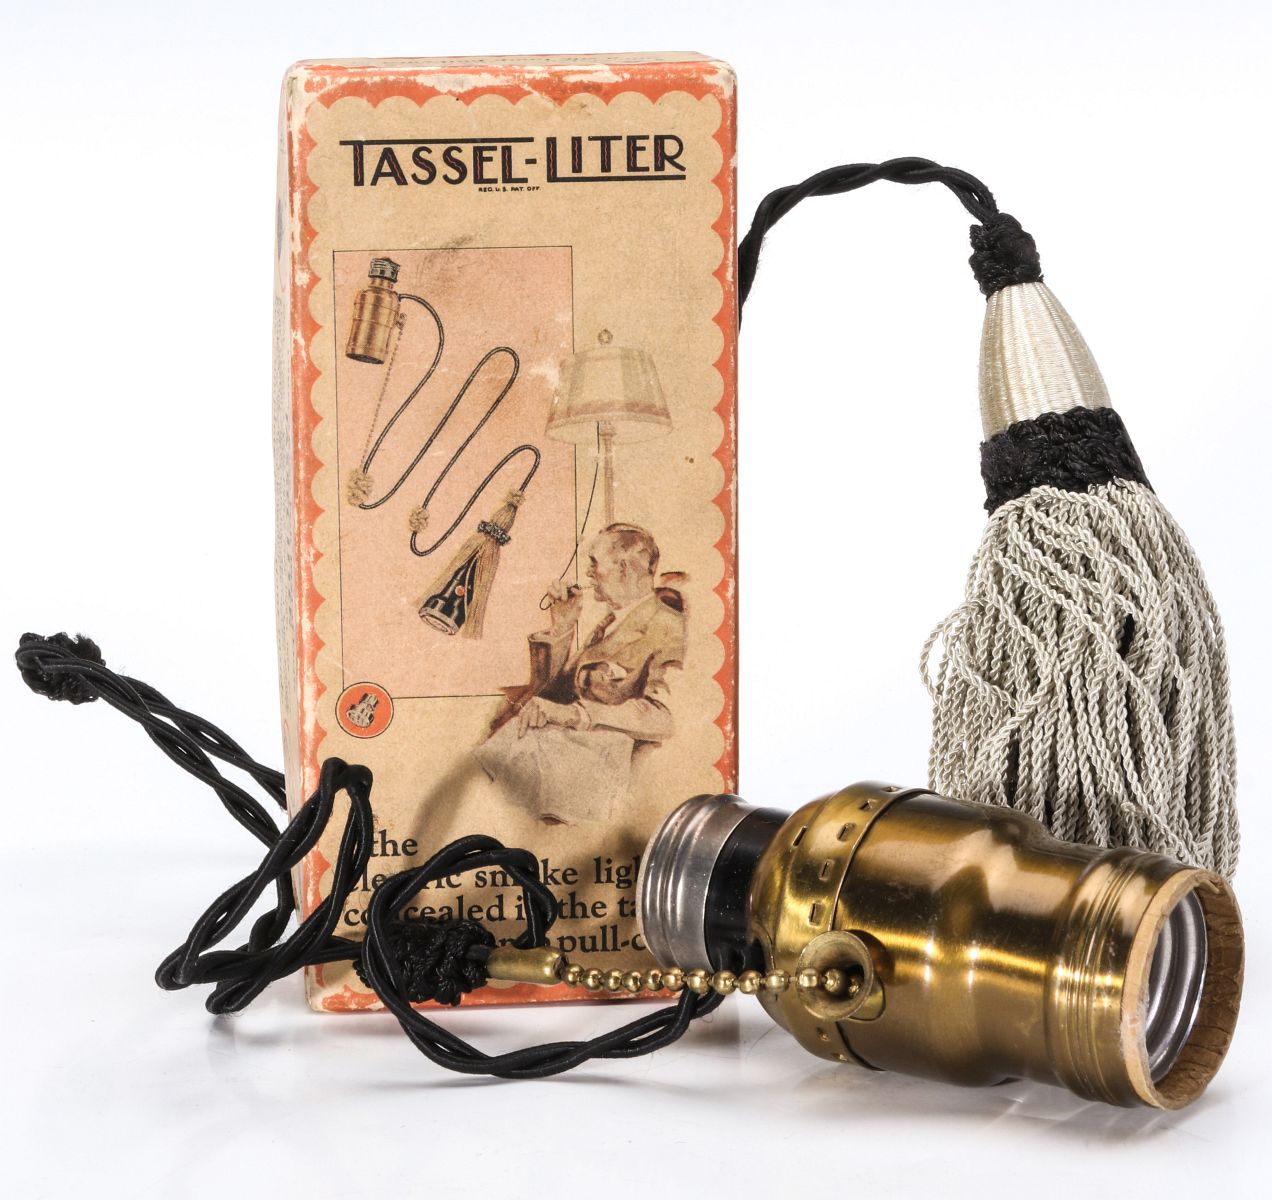 A TASSEL-LITER ELECTRIC CIGARETTE LIGHTER WITH BOX